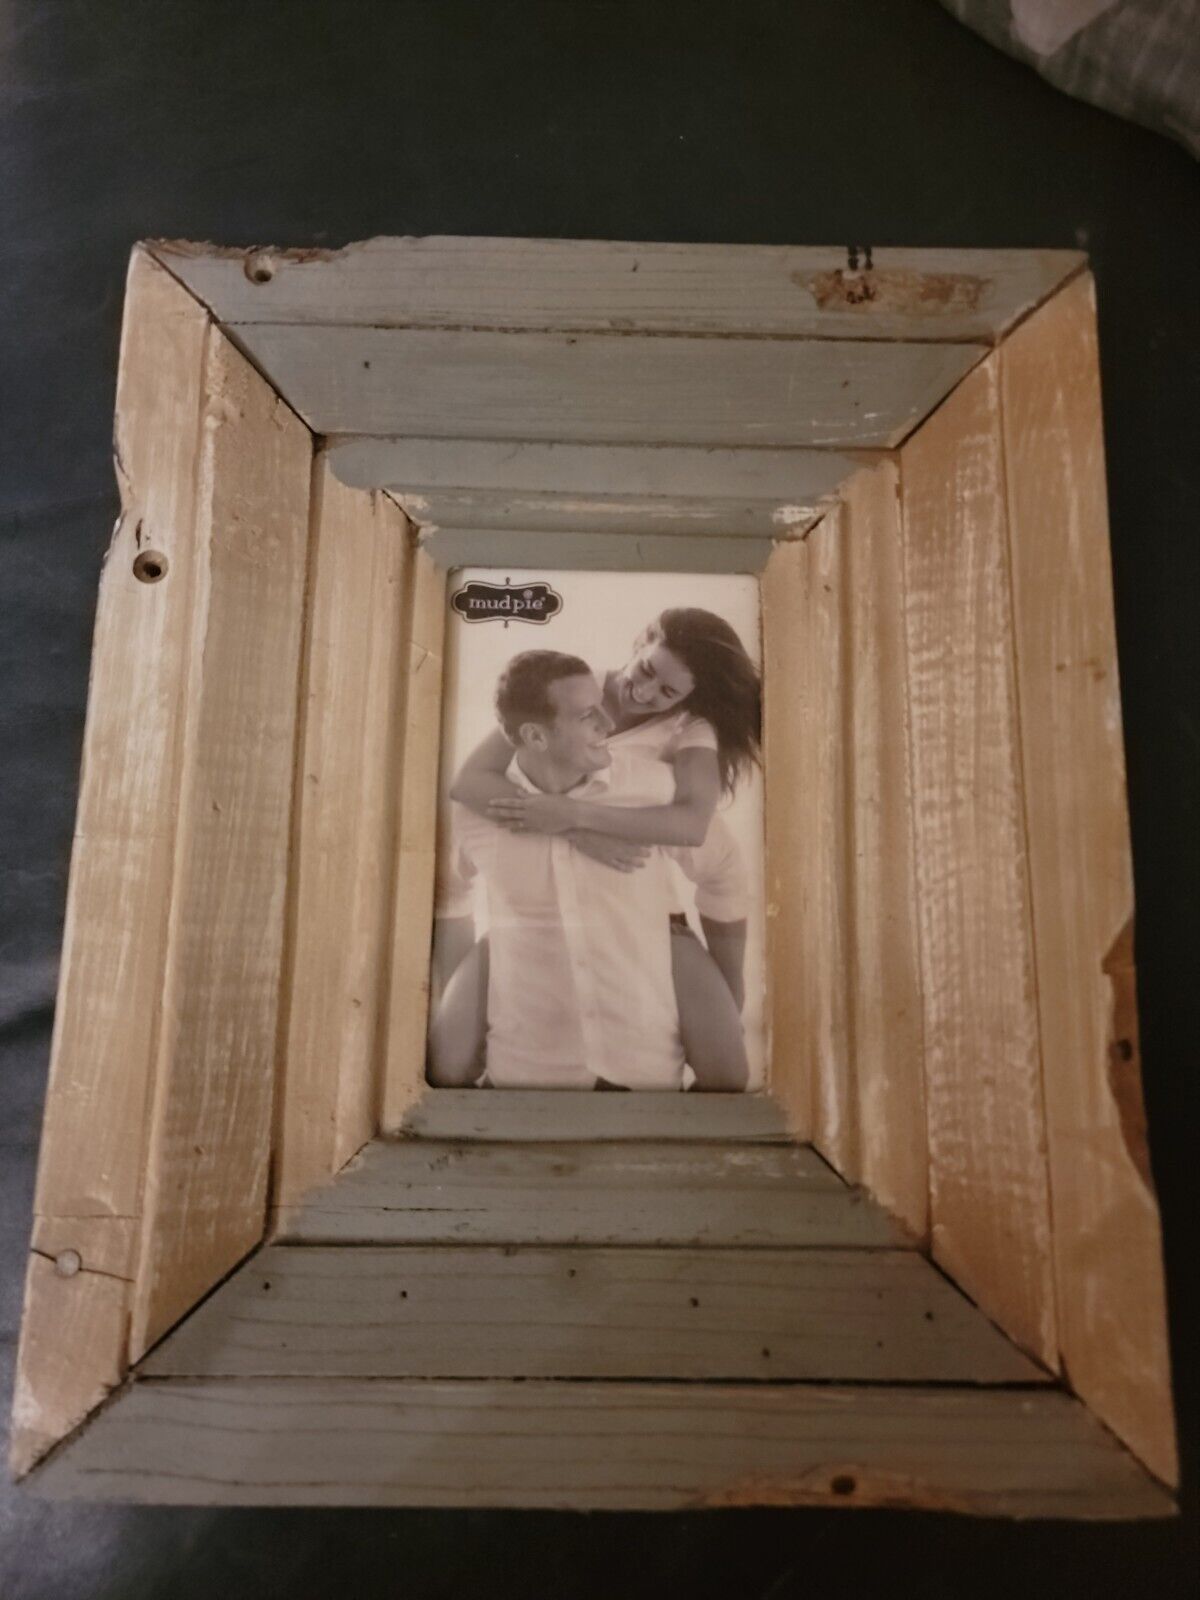 NEW Dillard’s Mudpie reclaimed wood photo picture frame tabletop or hang